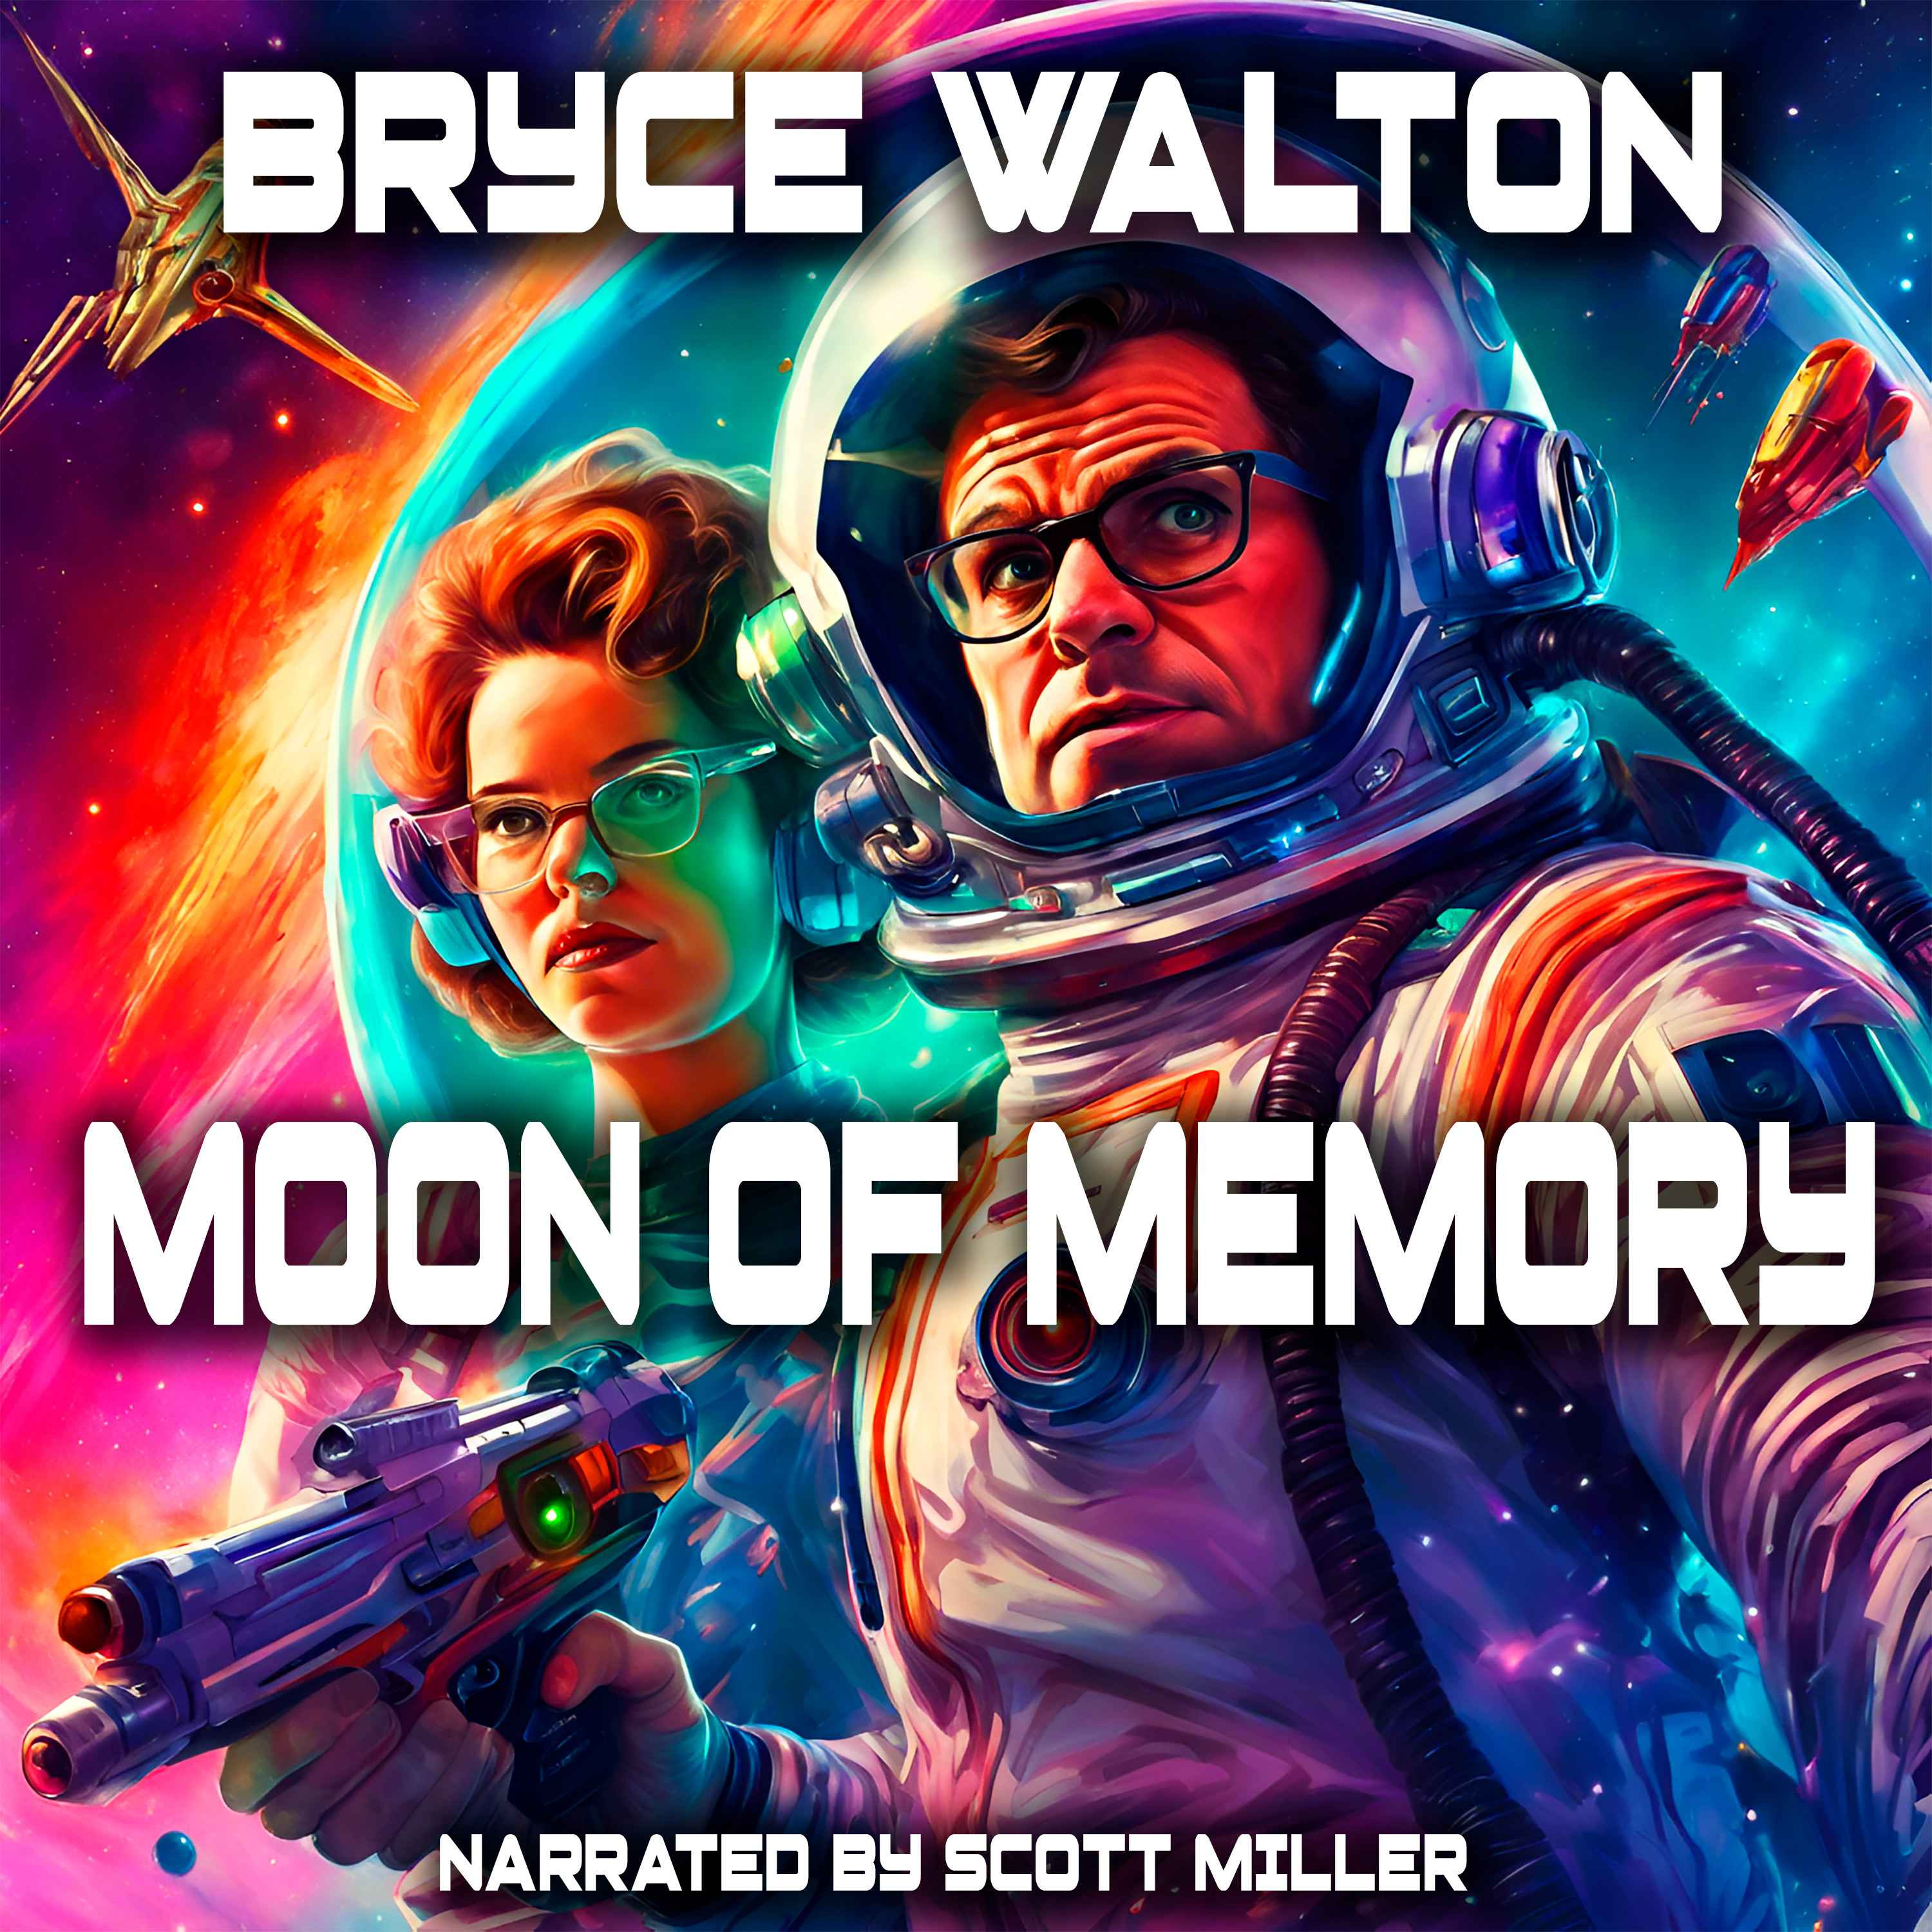 Moon of Memory by Bryce Walton - Short Sci Fi Story From the 1950s